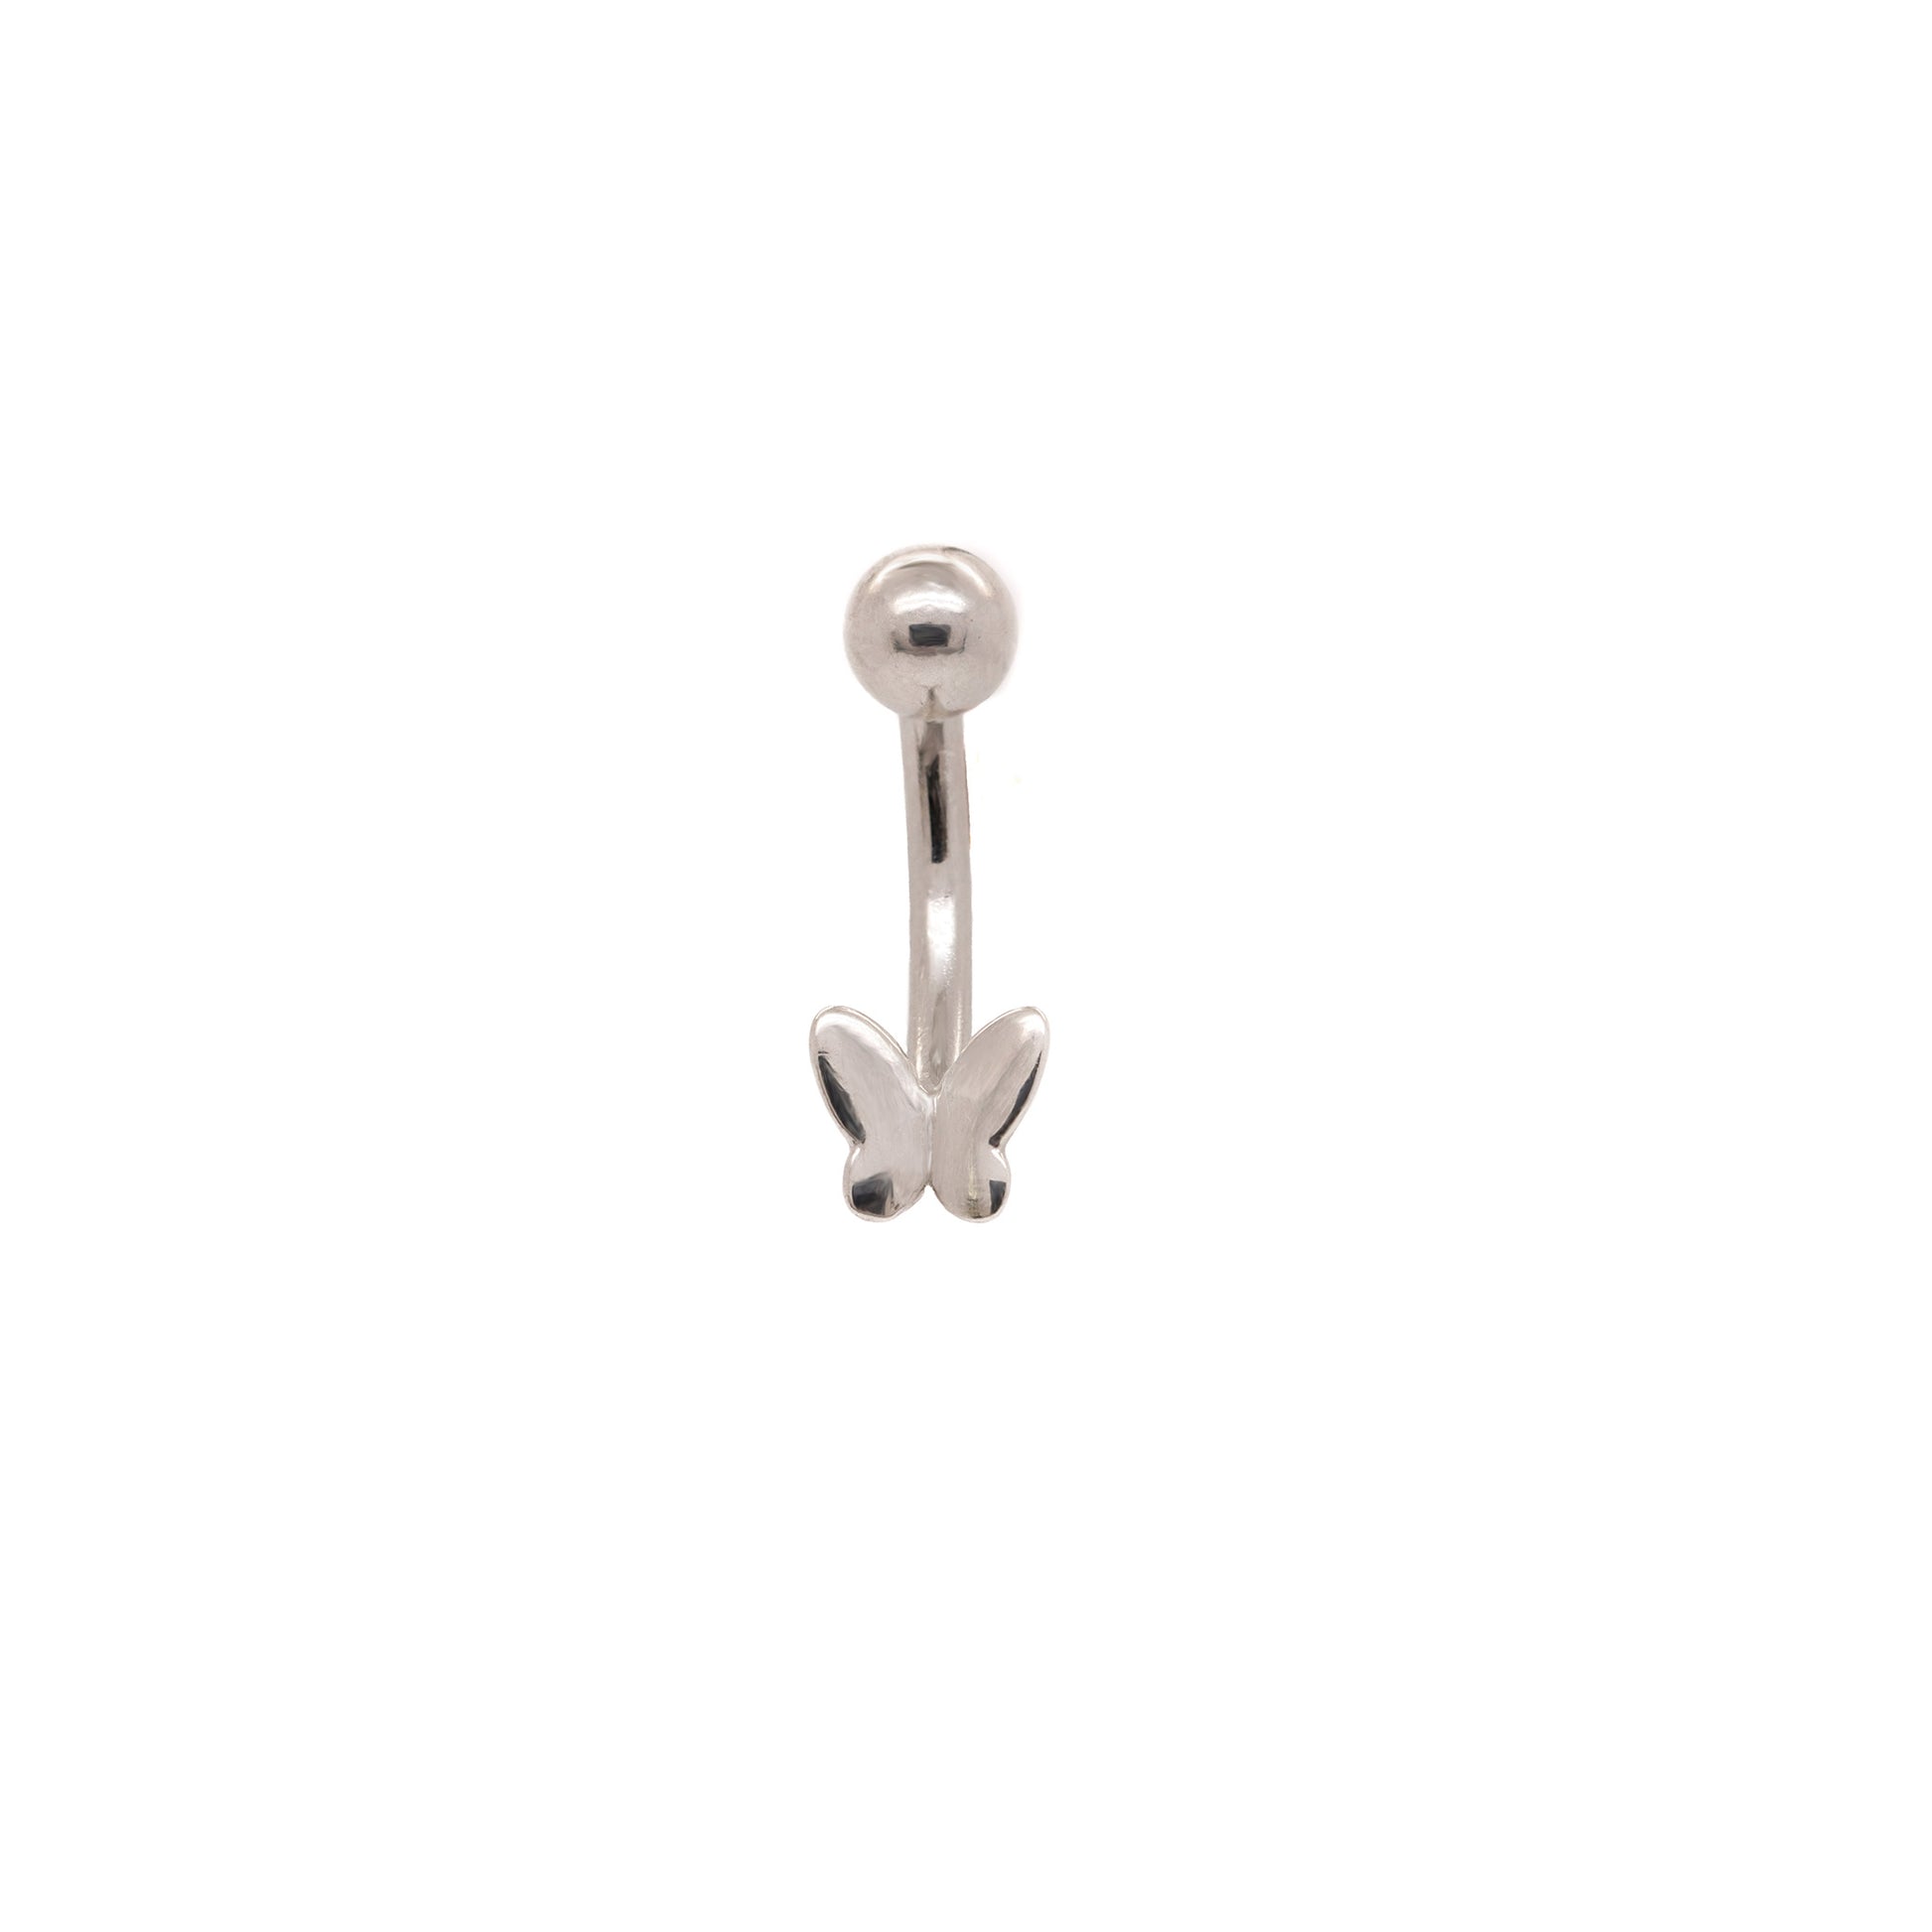 Solid 925 Silver | 16G 14G Petite Butterfly Belly Ring | 6mm 1/4" 8mm 5/16" 10mm 3/8" - Sturdy South